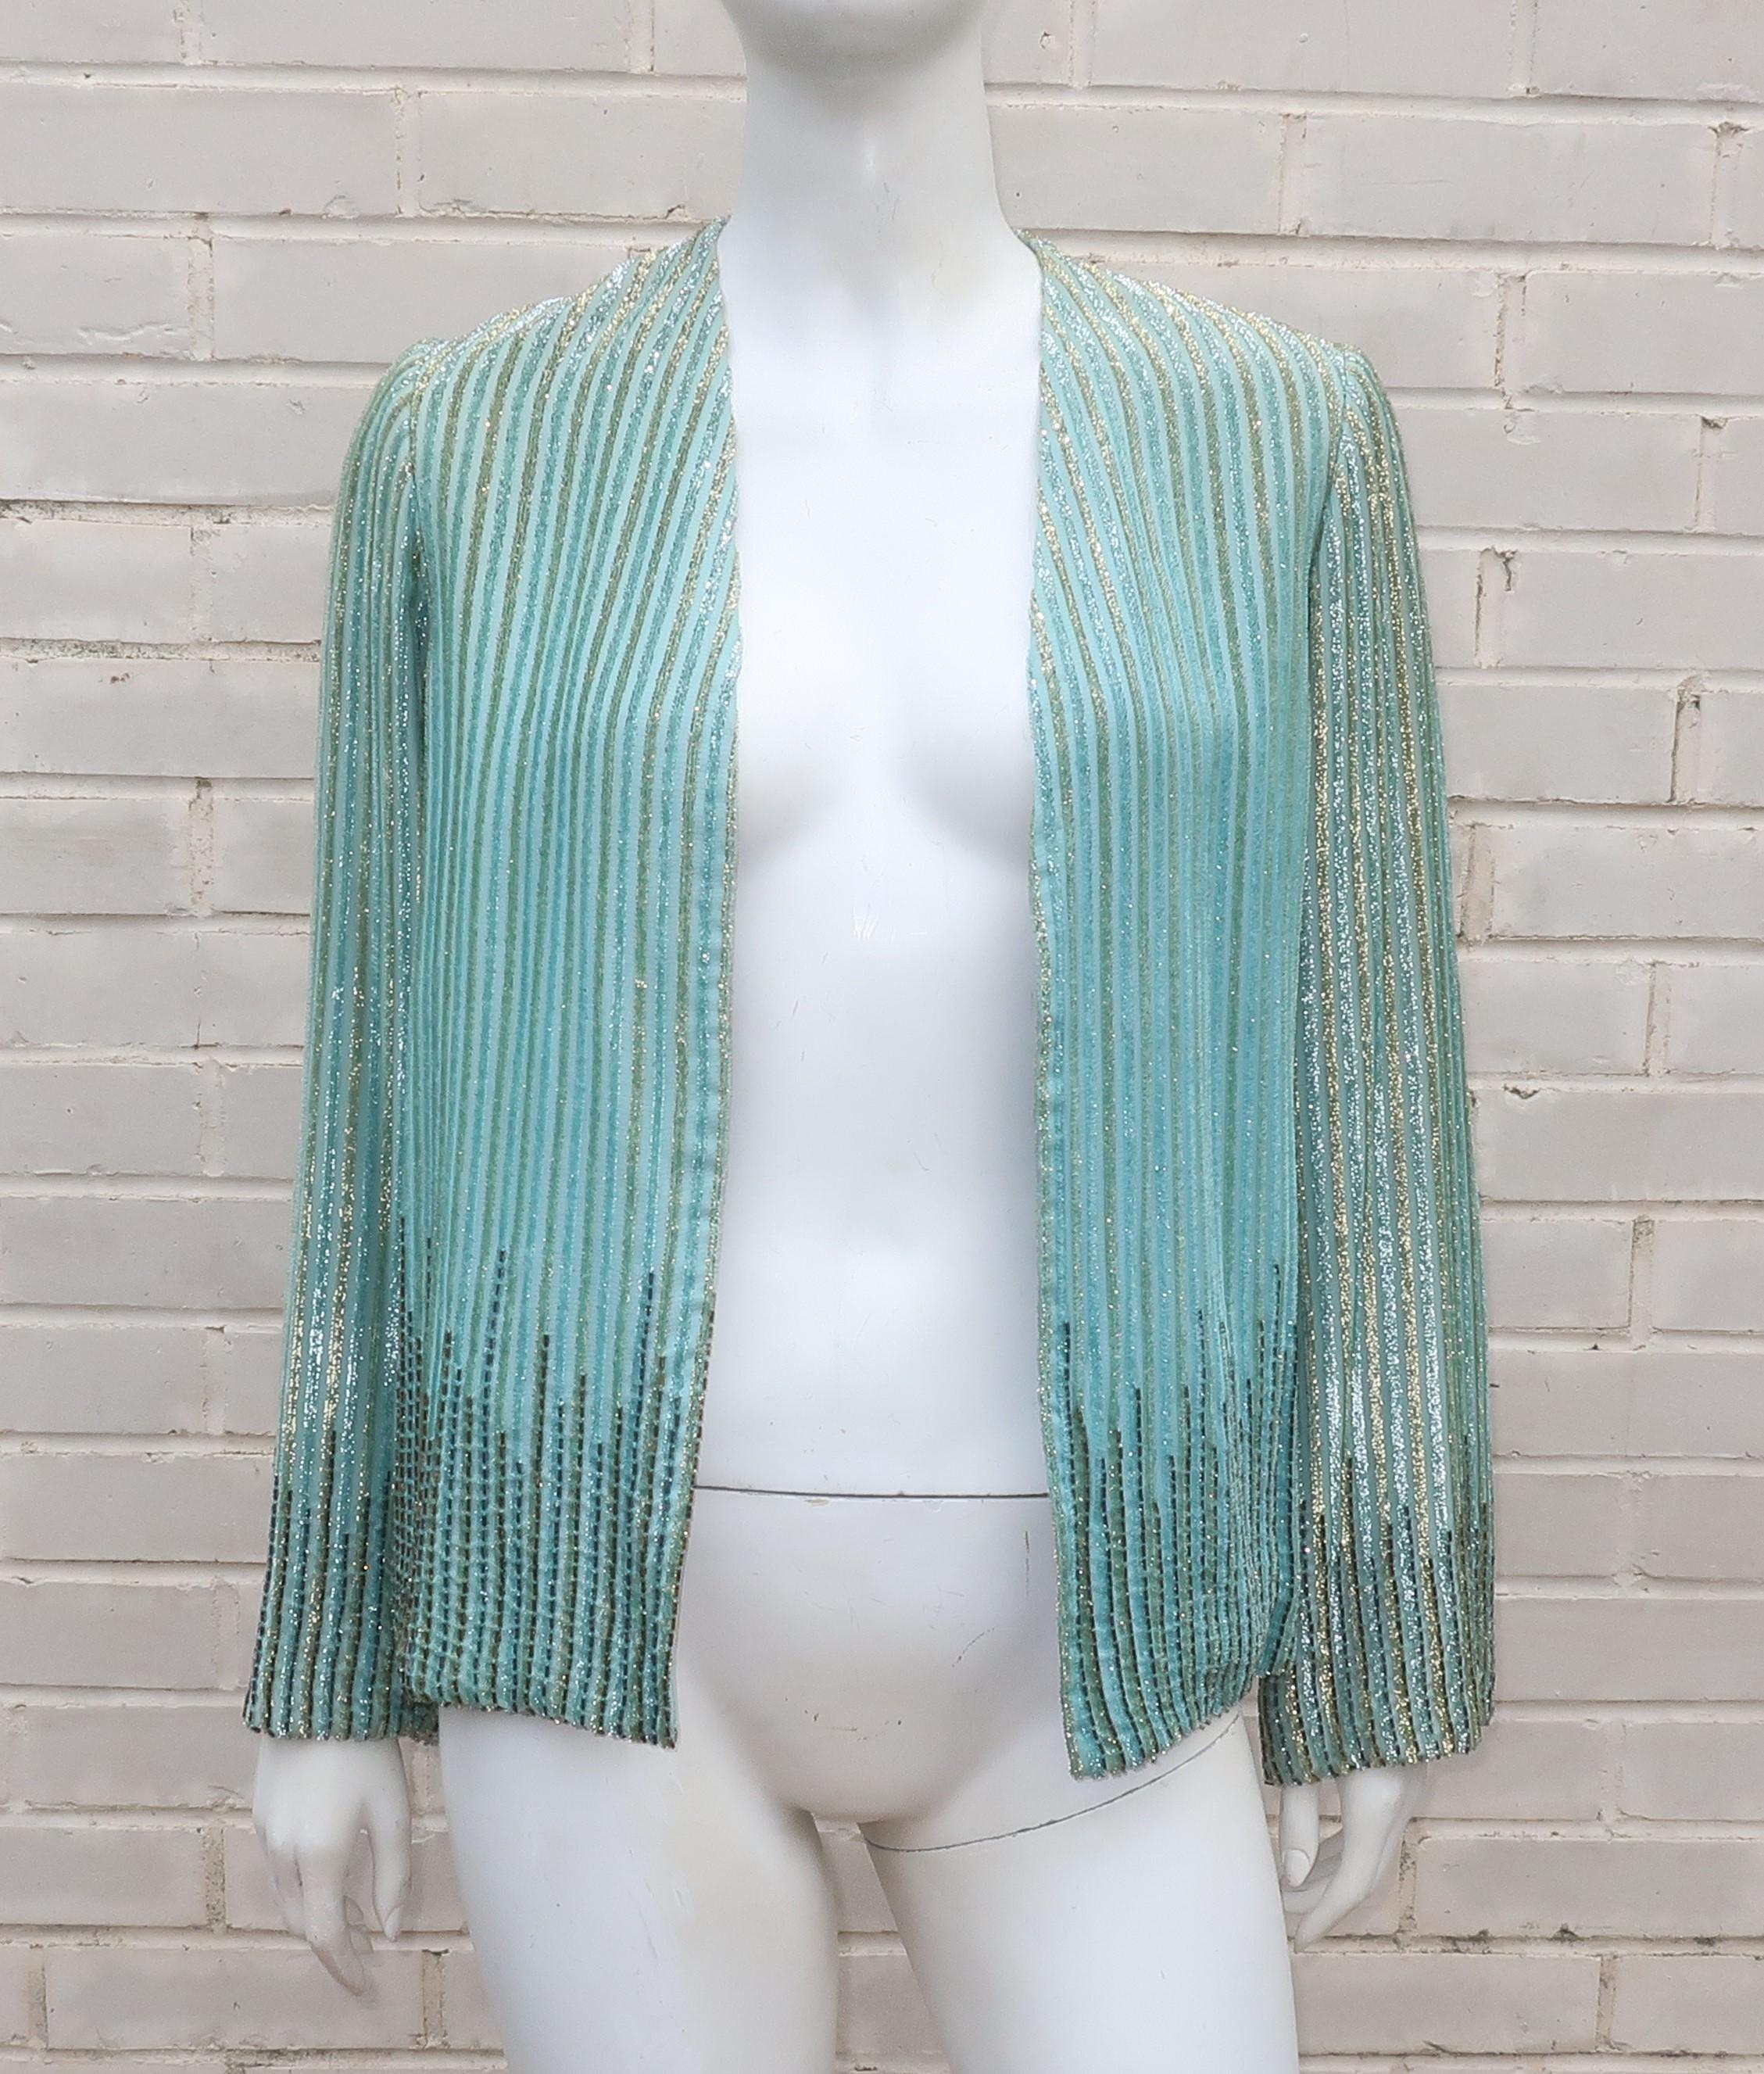 Alfred Bosand Two Piece Beaded Mint Green Halter Dress & Jacket, 1970's For Sale 9